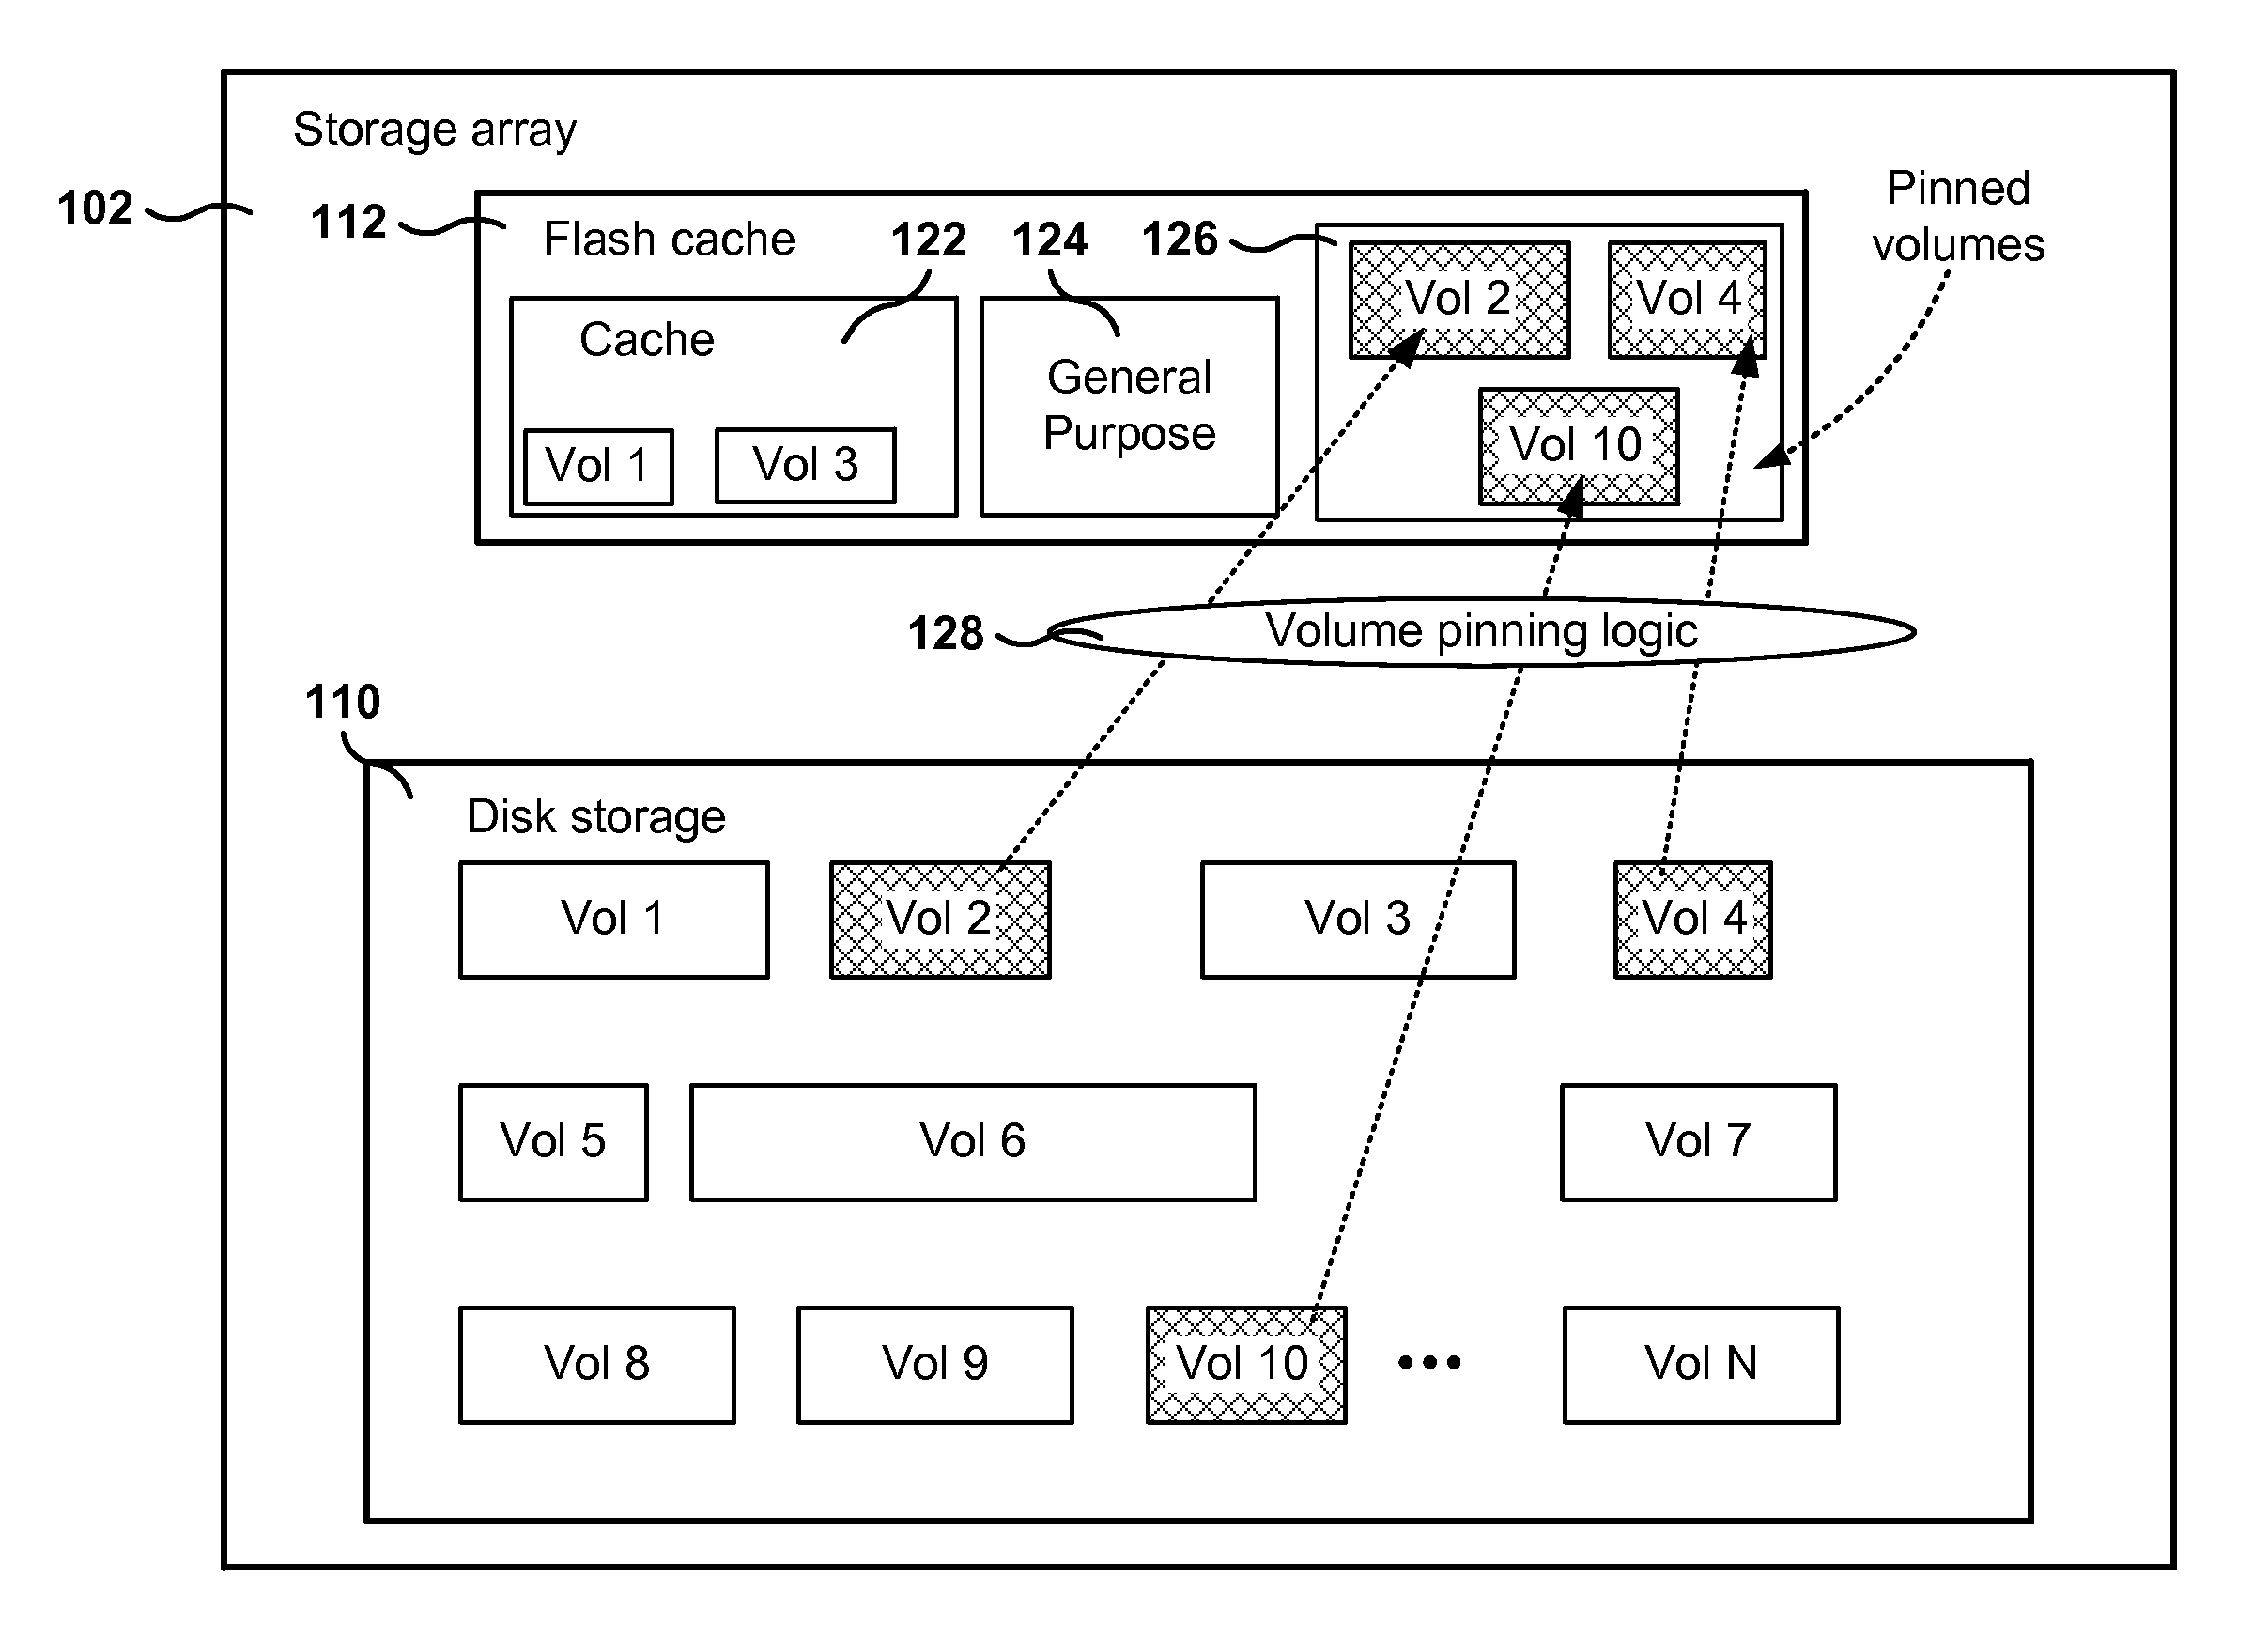 Management of pinned storage in flash based on flash-to-disk capacity ratio